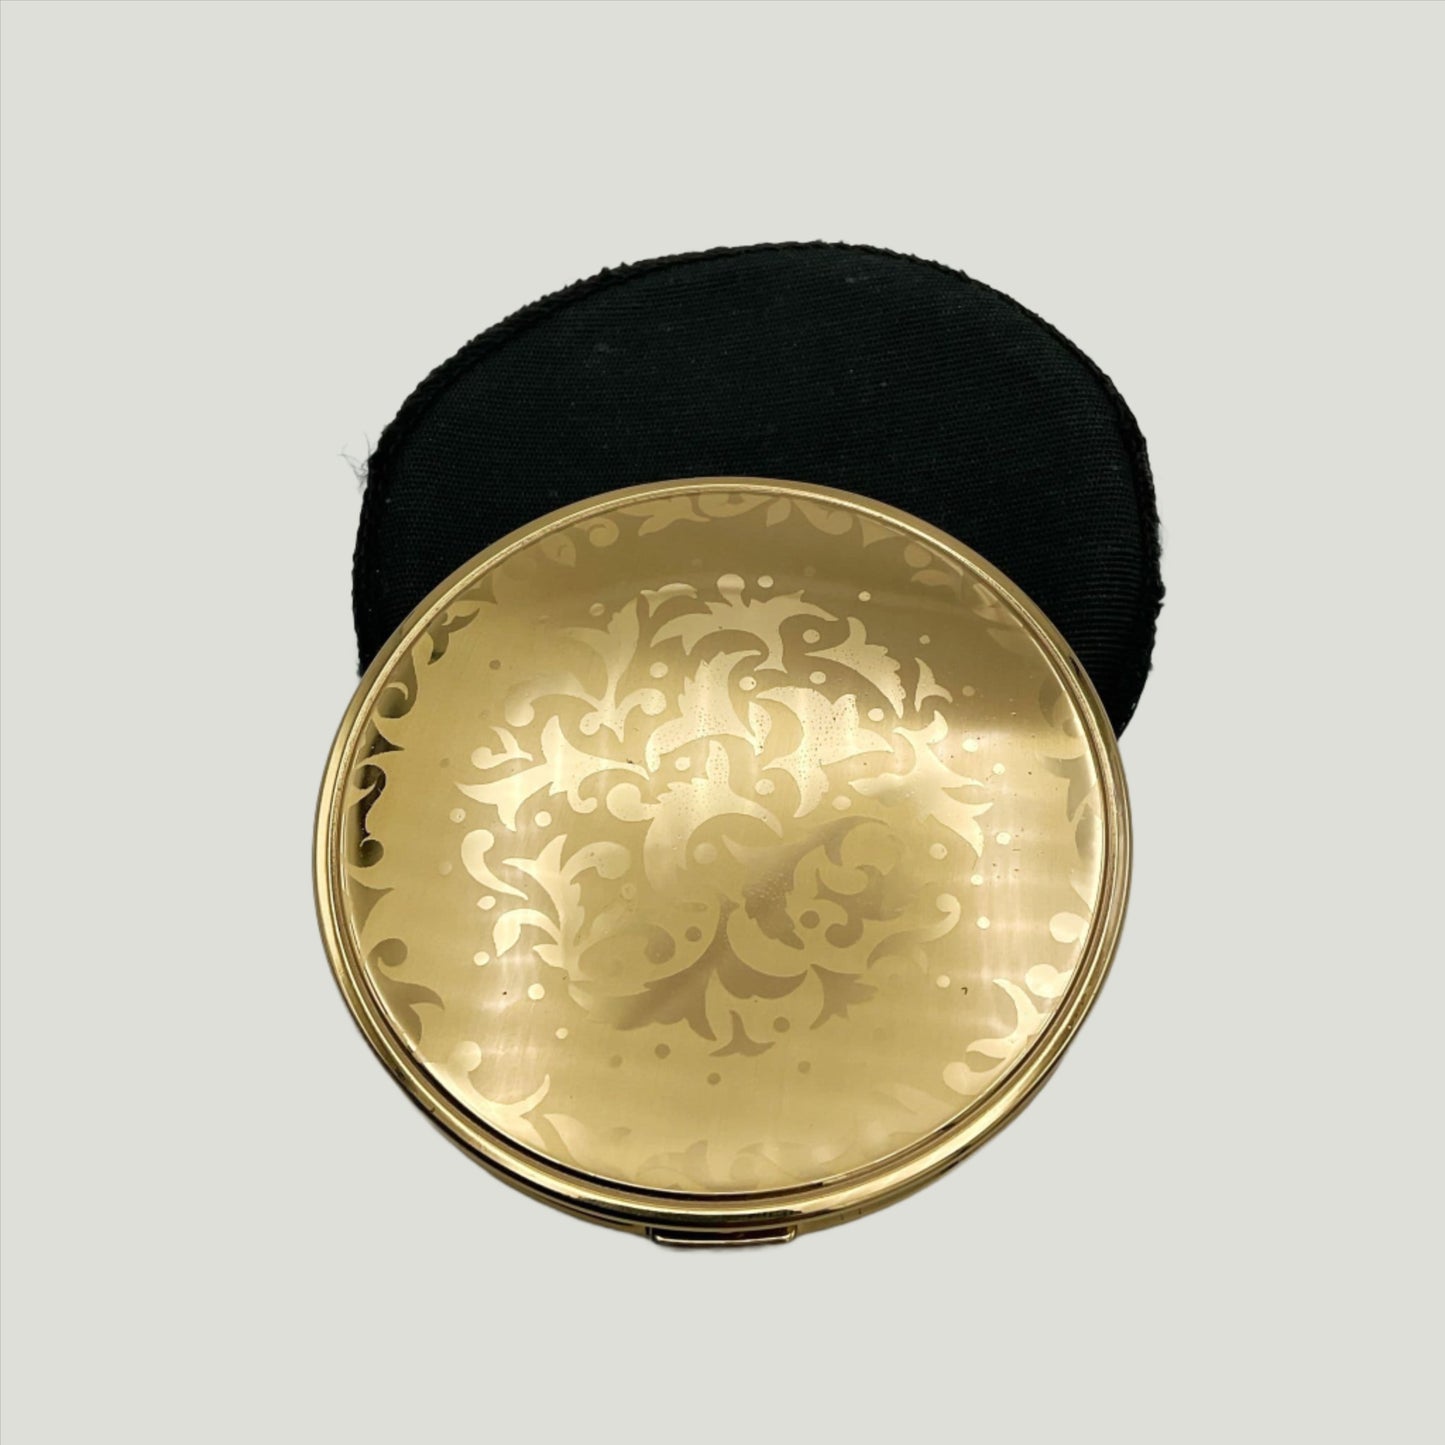 gold coloured lid of powder compact with leaf pattern on a black felt case